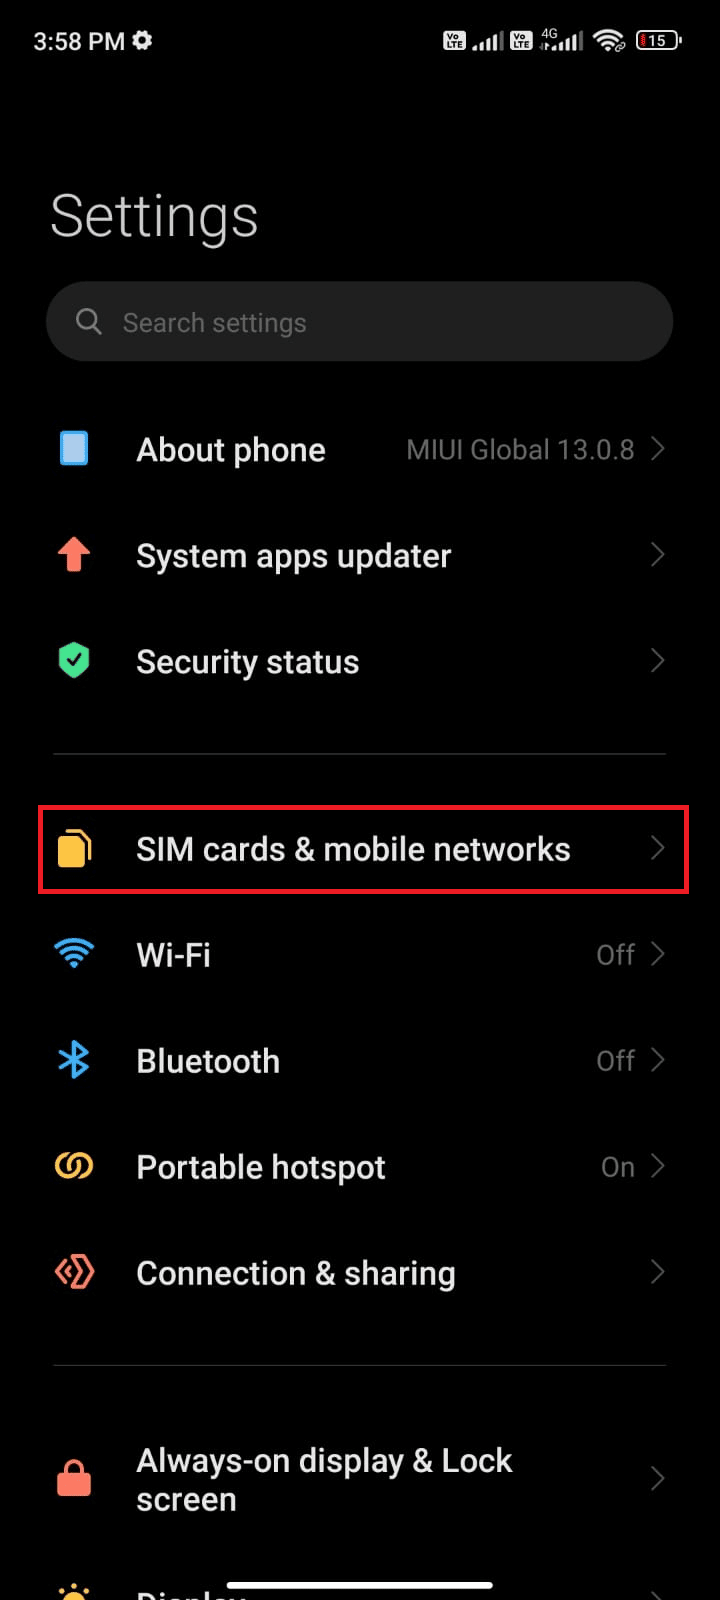 tap the SIM cards mobile networks option. Fix WhatsApp Stopped Working Today on Android